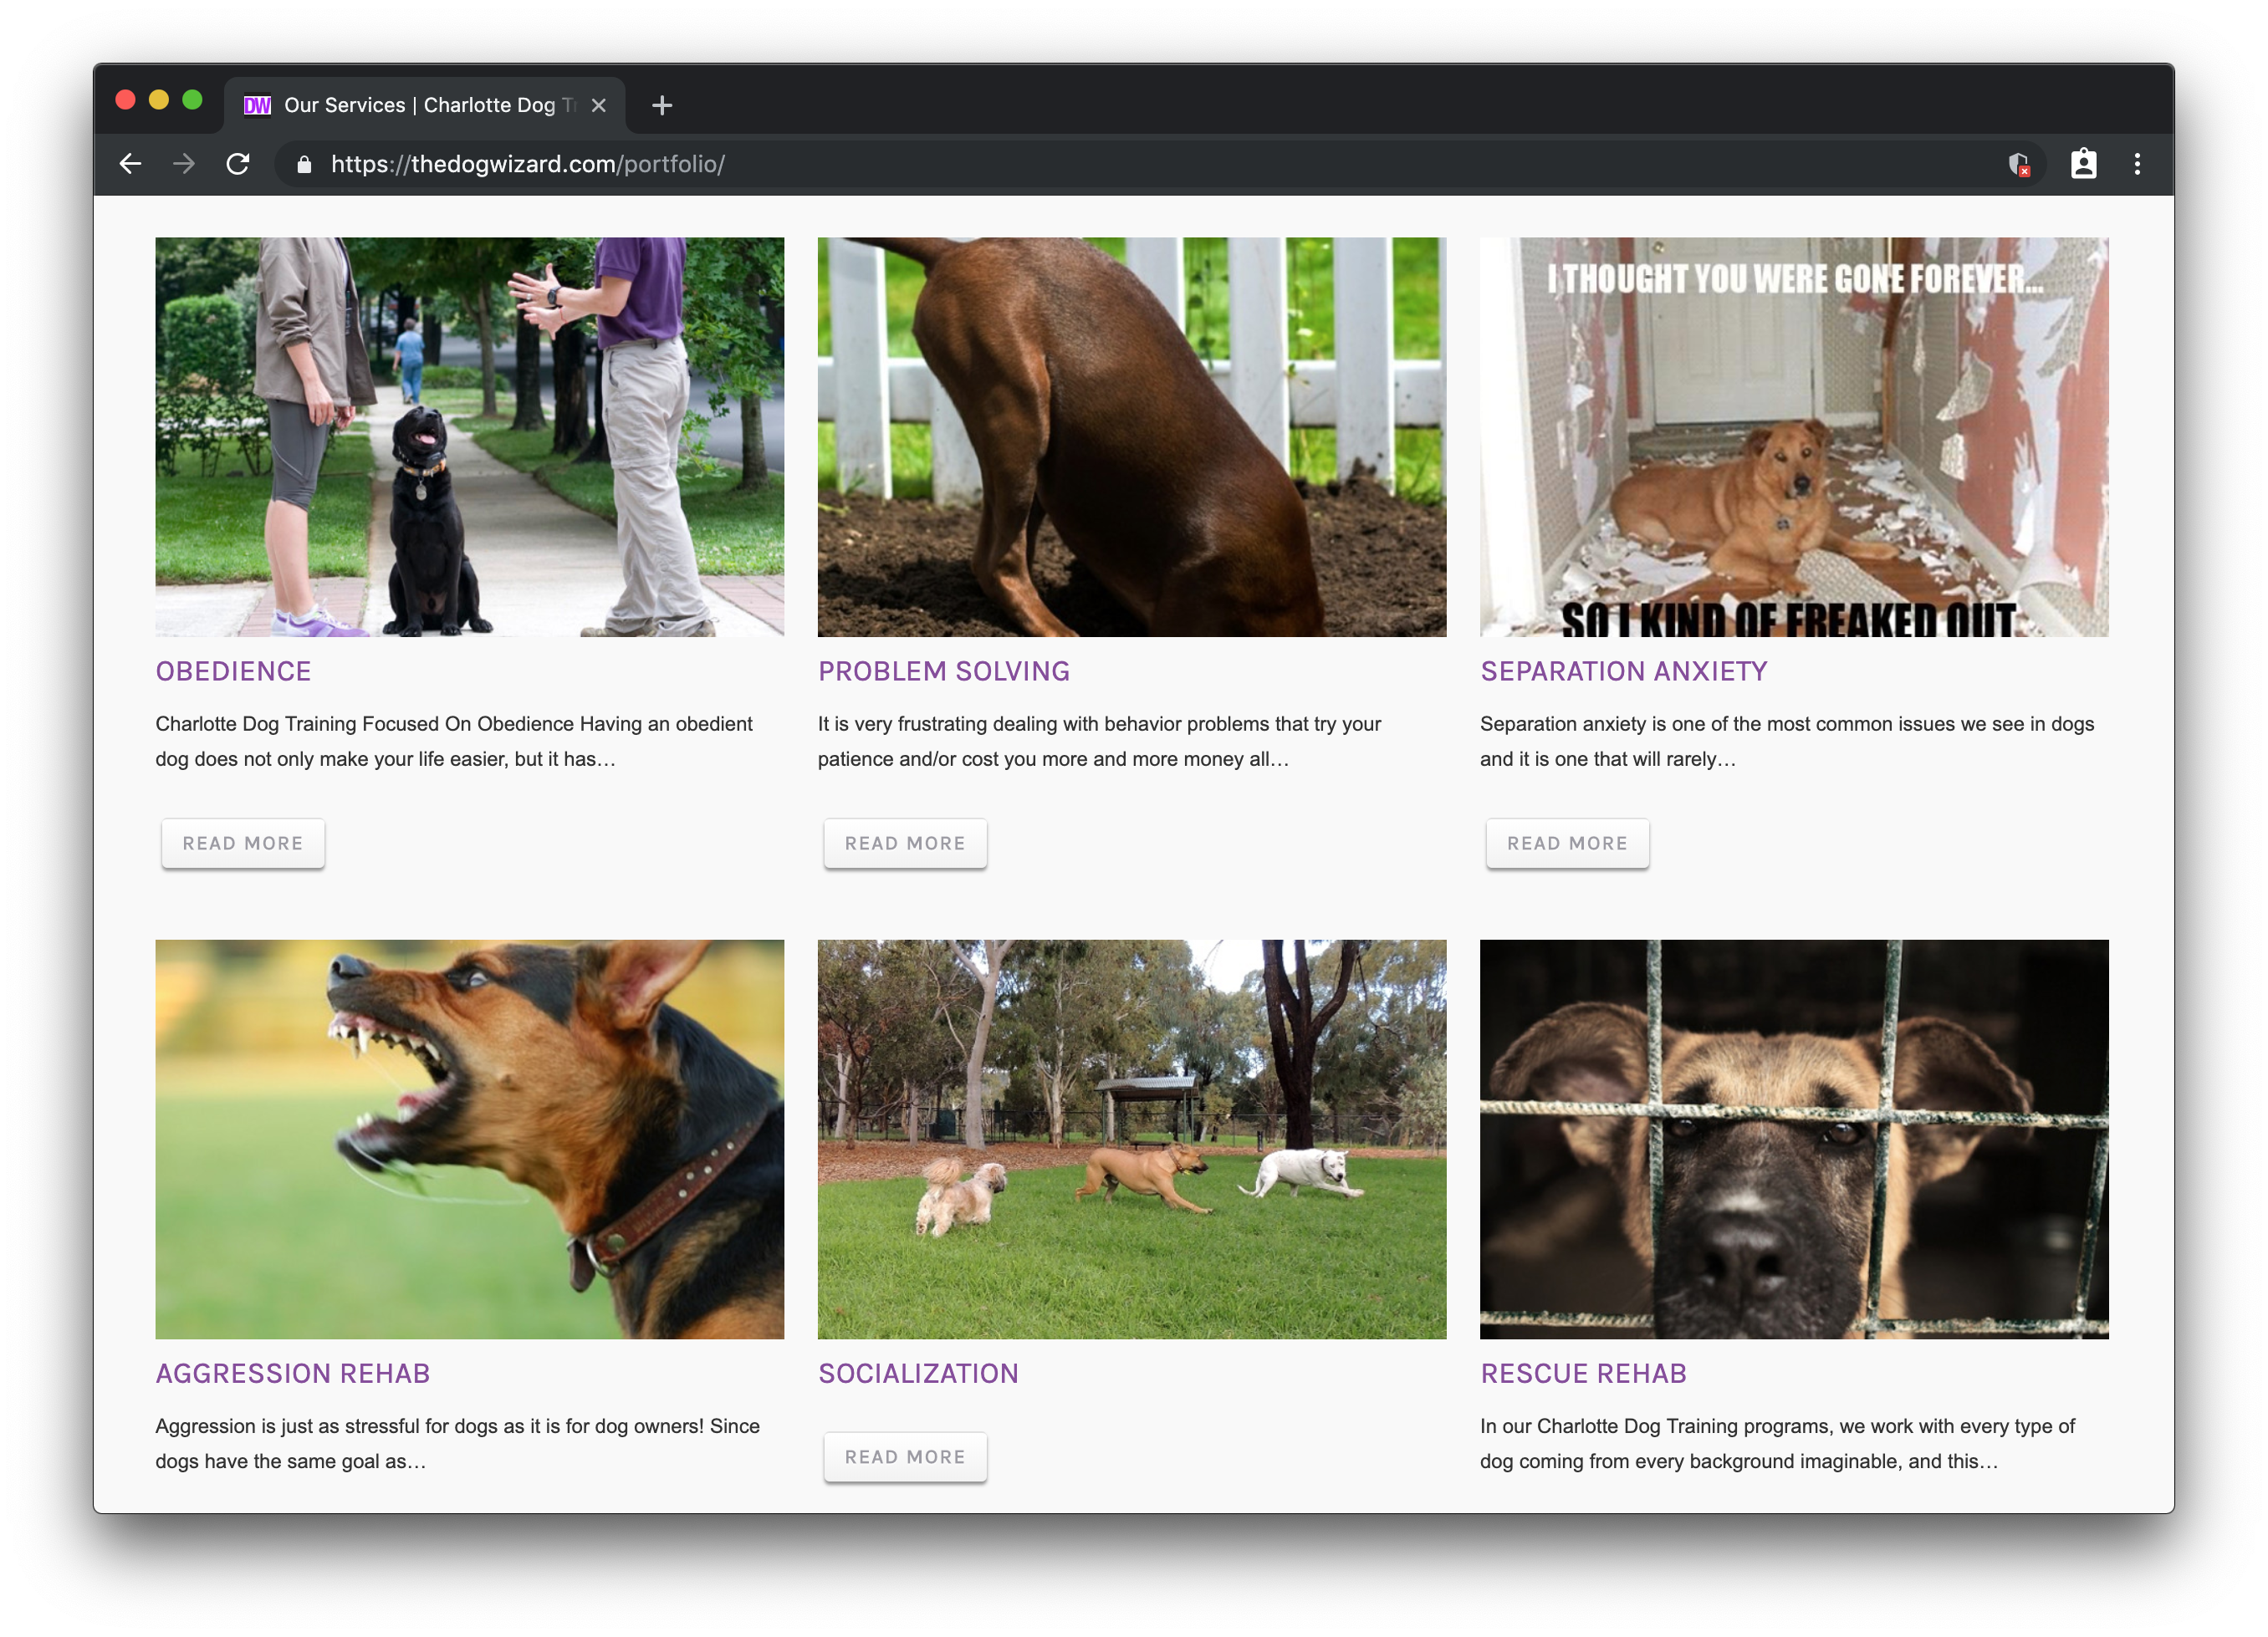 A screenshot of The Dog Wizard services webpage showing a 3 by 2 grid of images and headlines promoting dog services, like obedience, problem solving, and socialization.